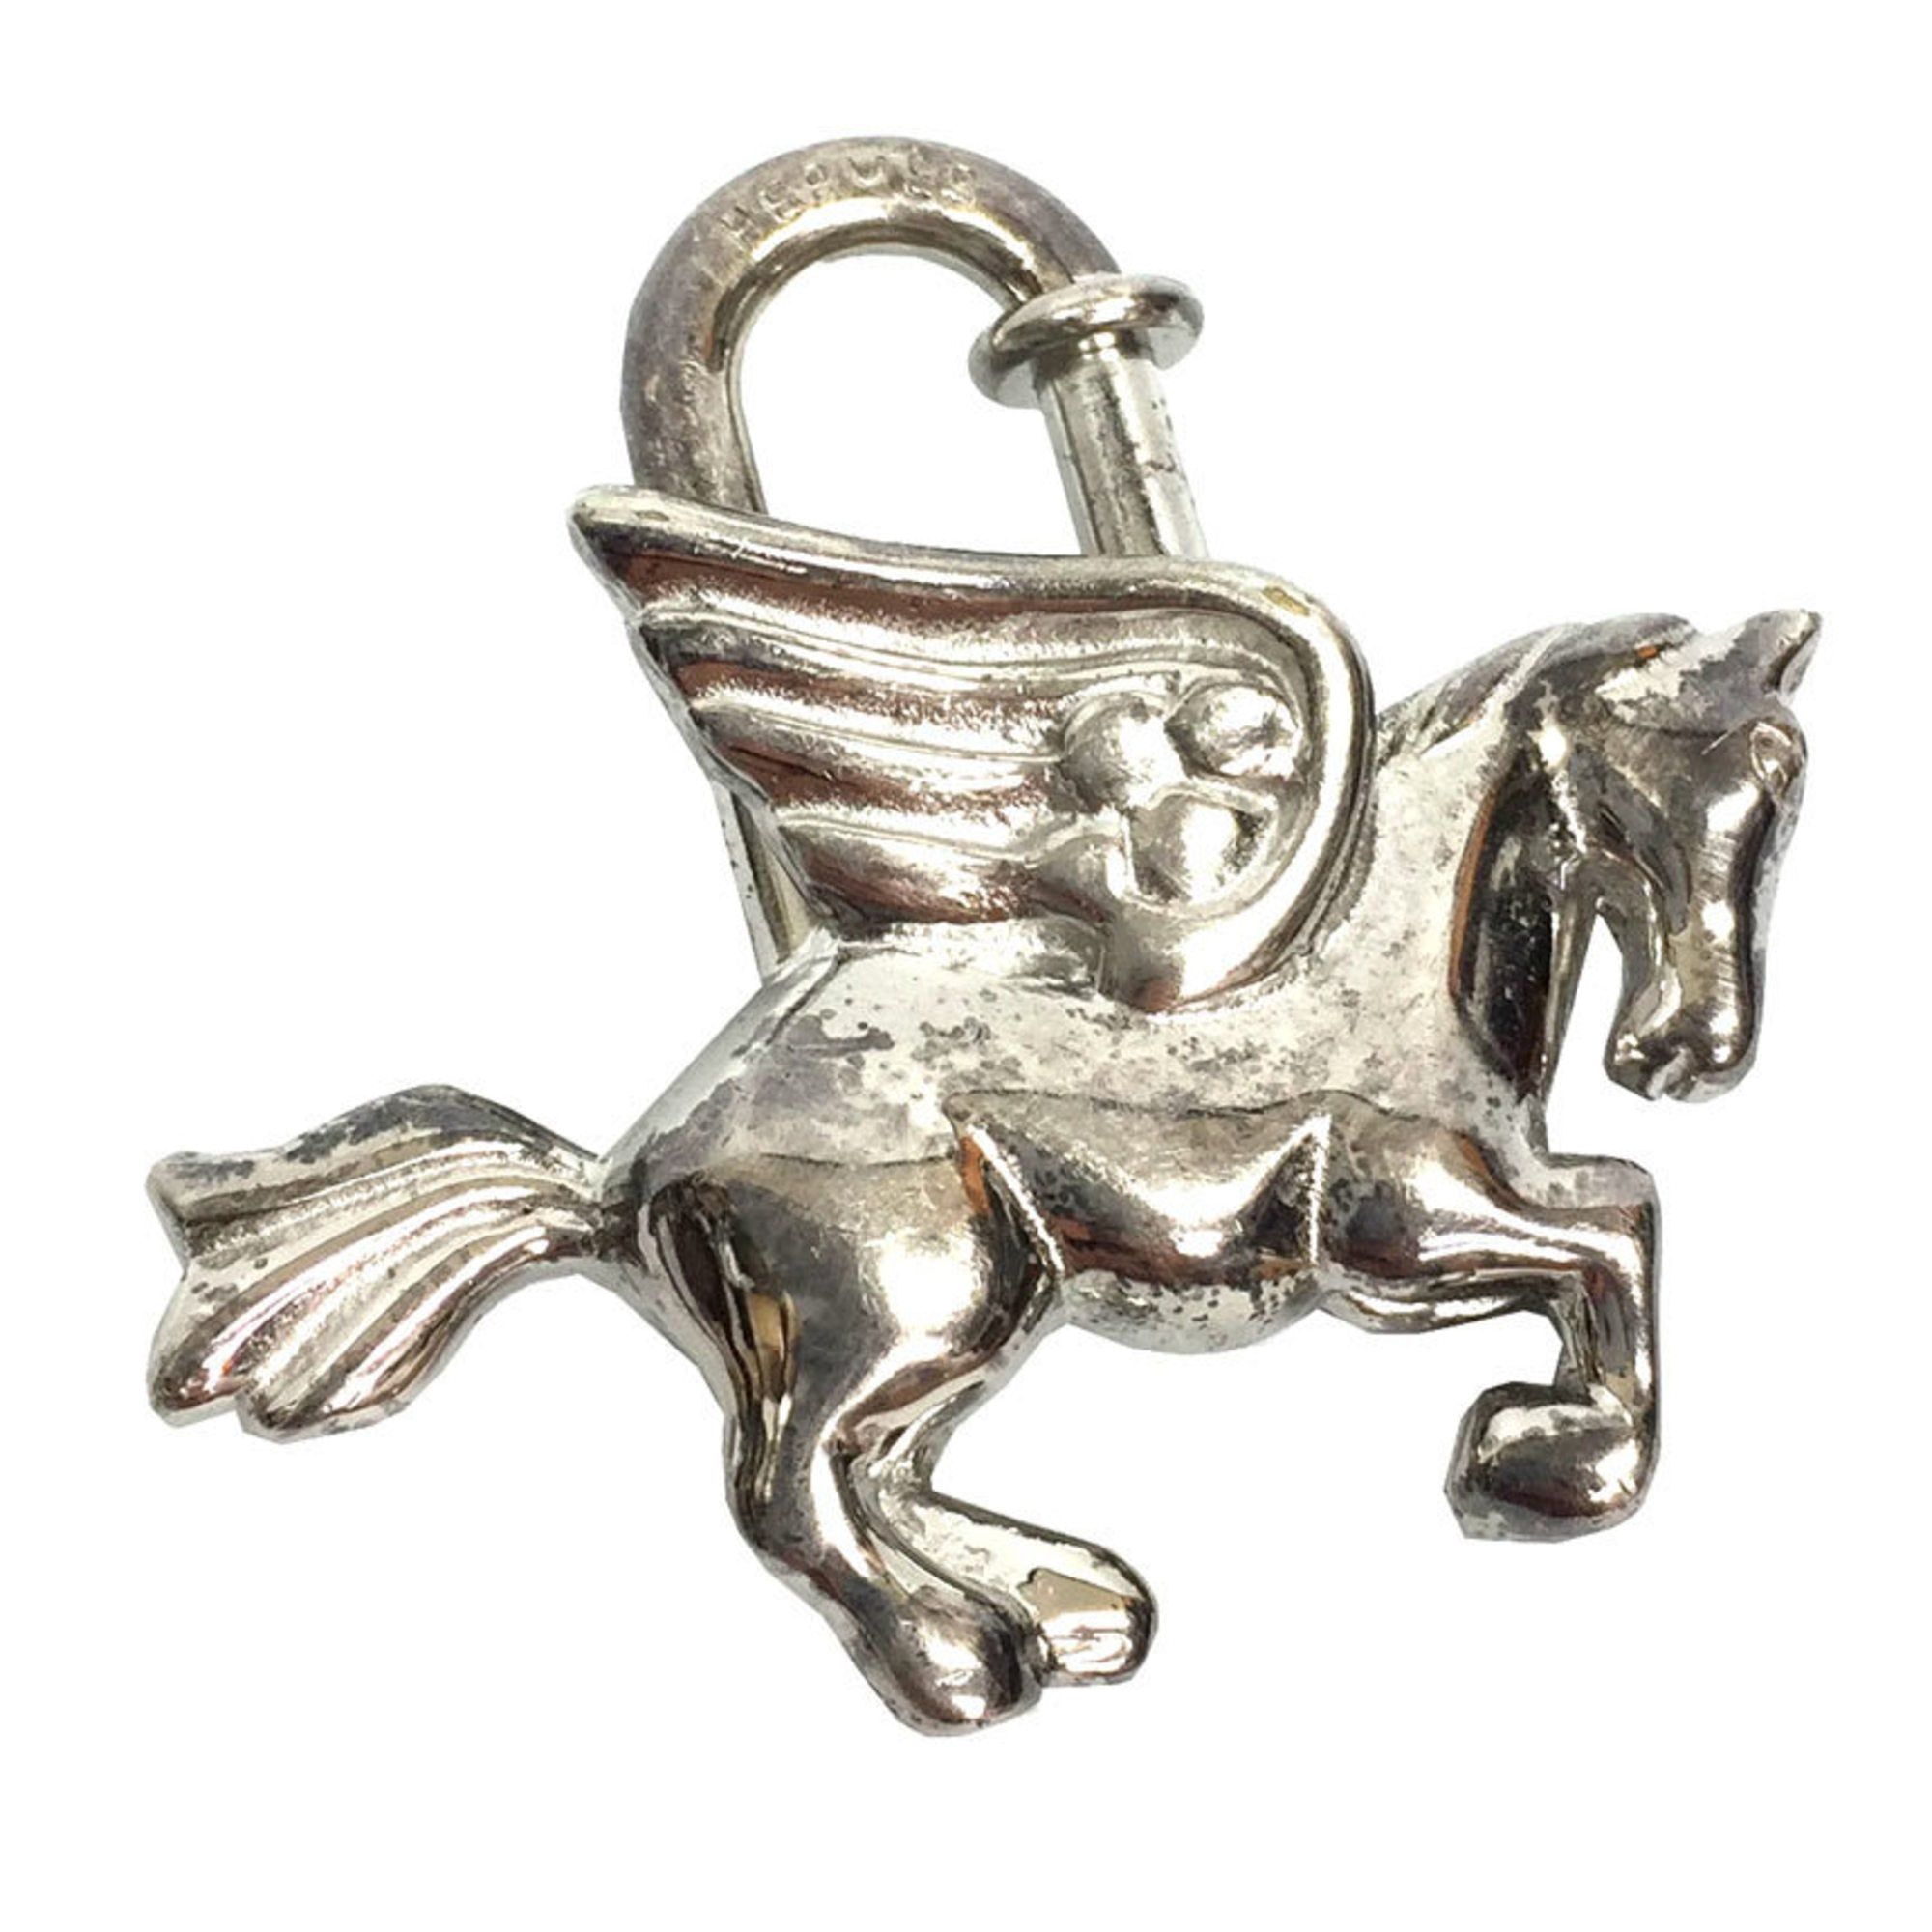 image of Hermes Pegasus Cadena Necklace Charm Pendant Bag 1993 Limited Silver Color Keychain Top Small Aq645